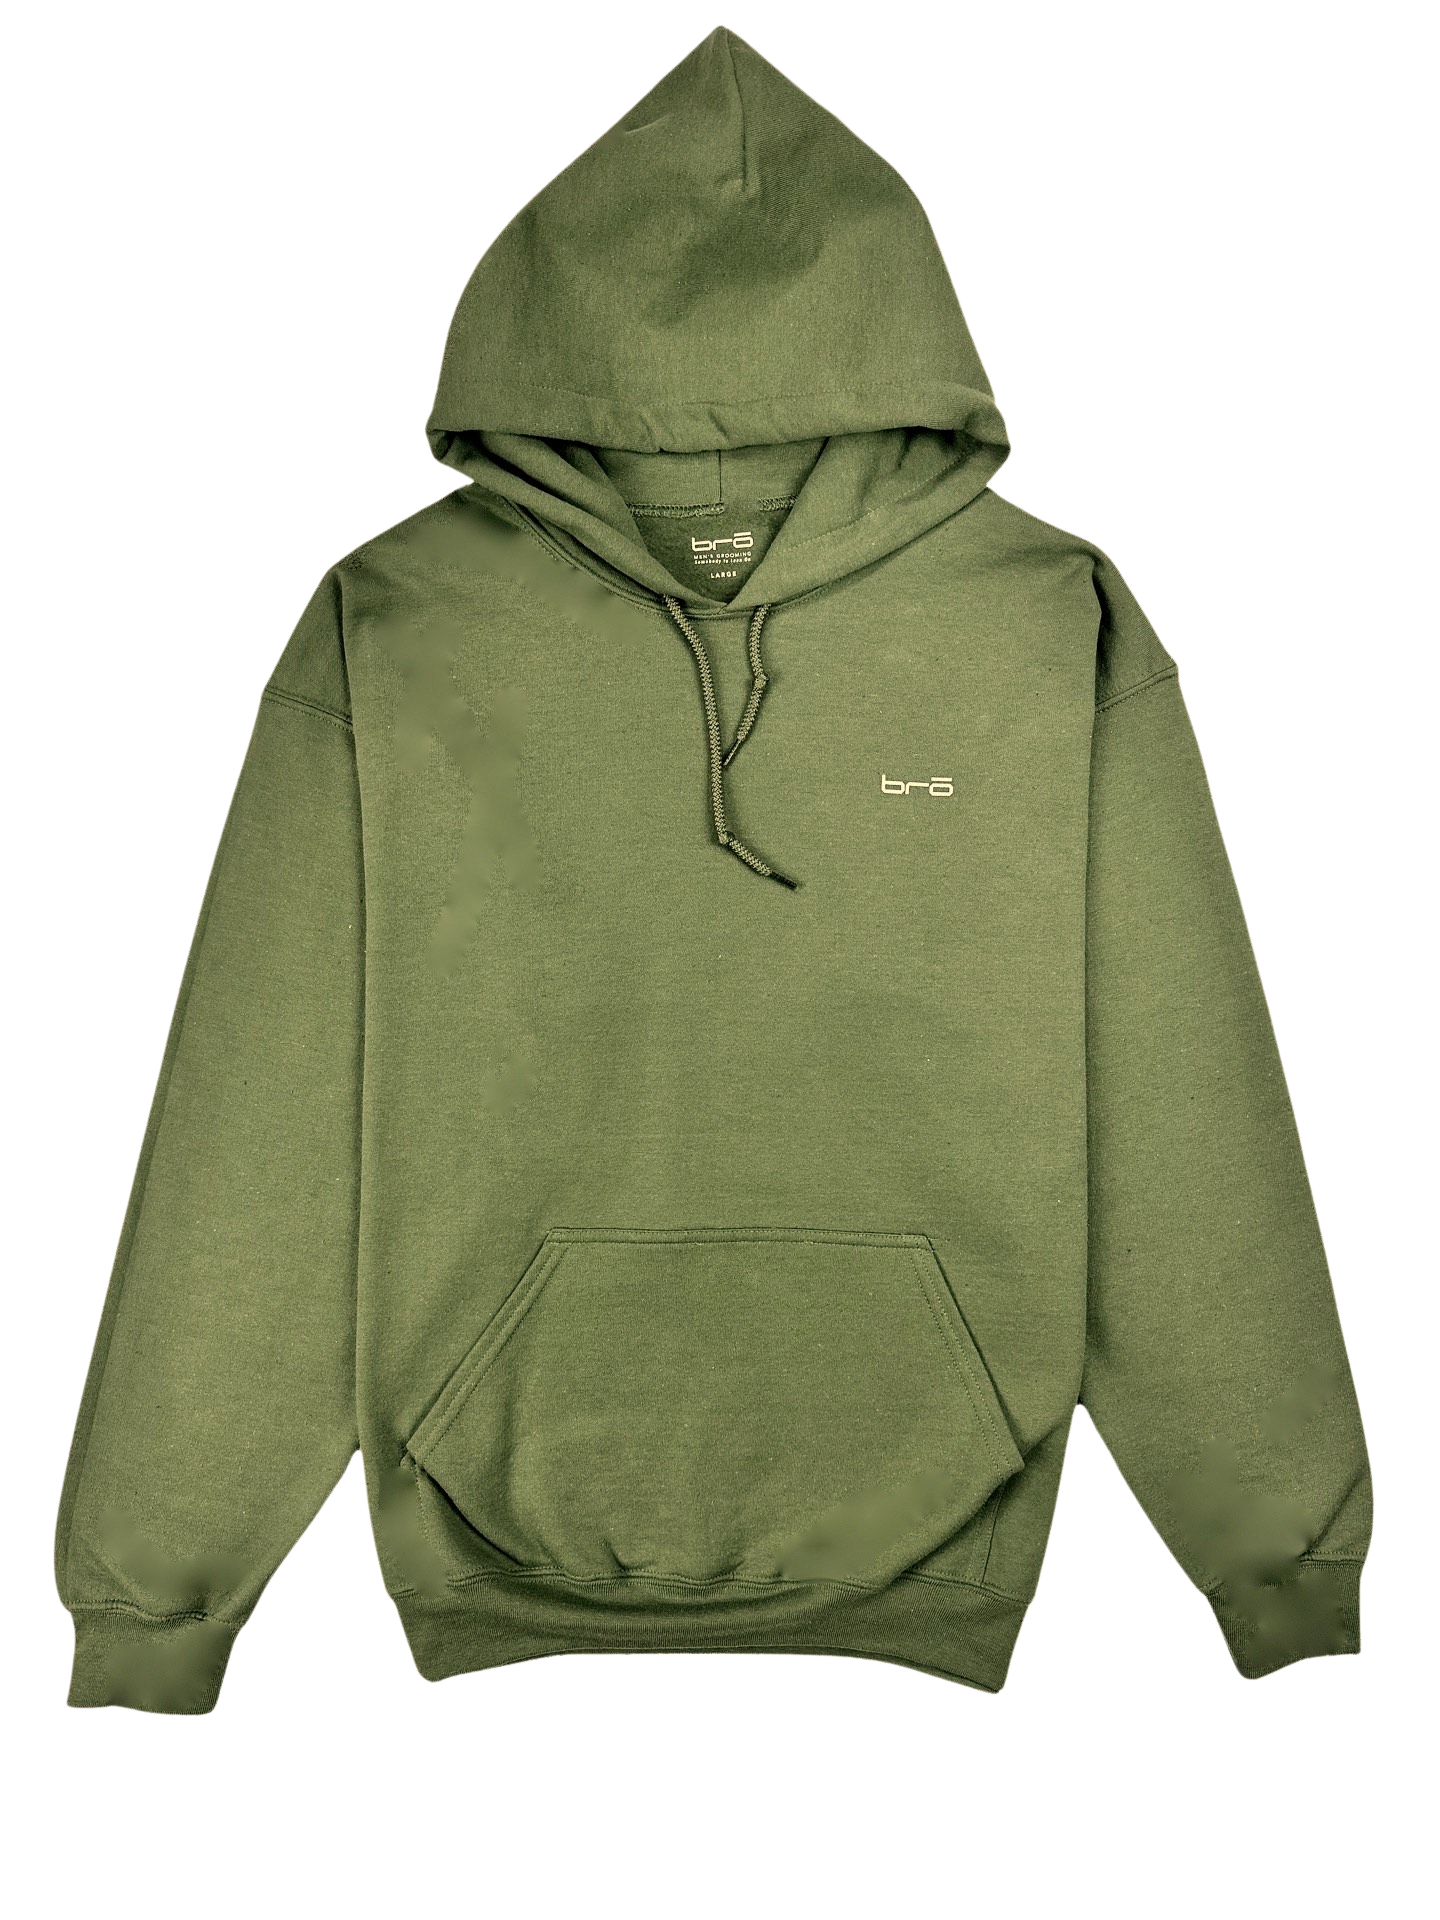 BRO "One Brother At A Time"  Hoodie | Military Green